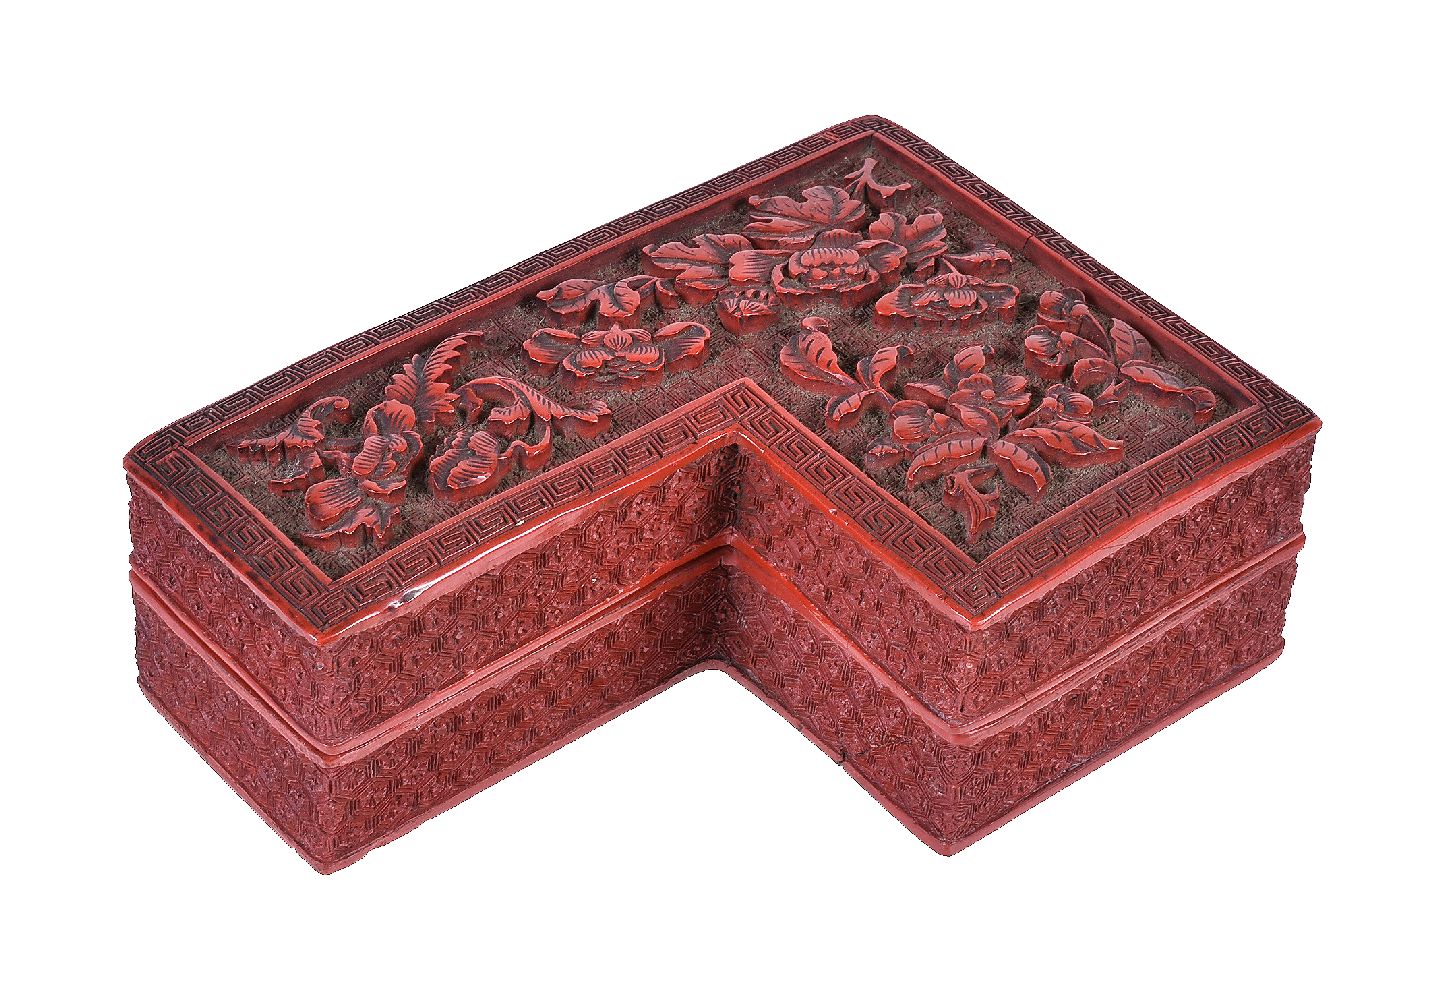 A Chinese Cinnabar shaped box and cover